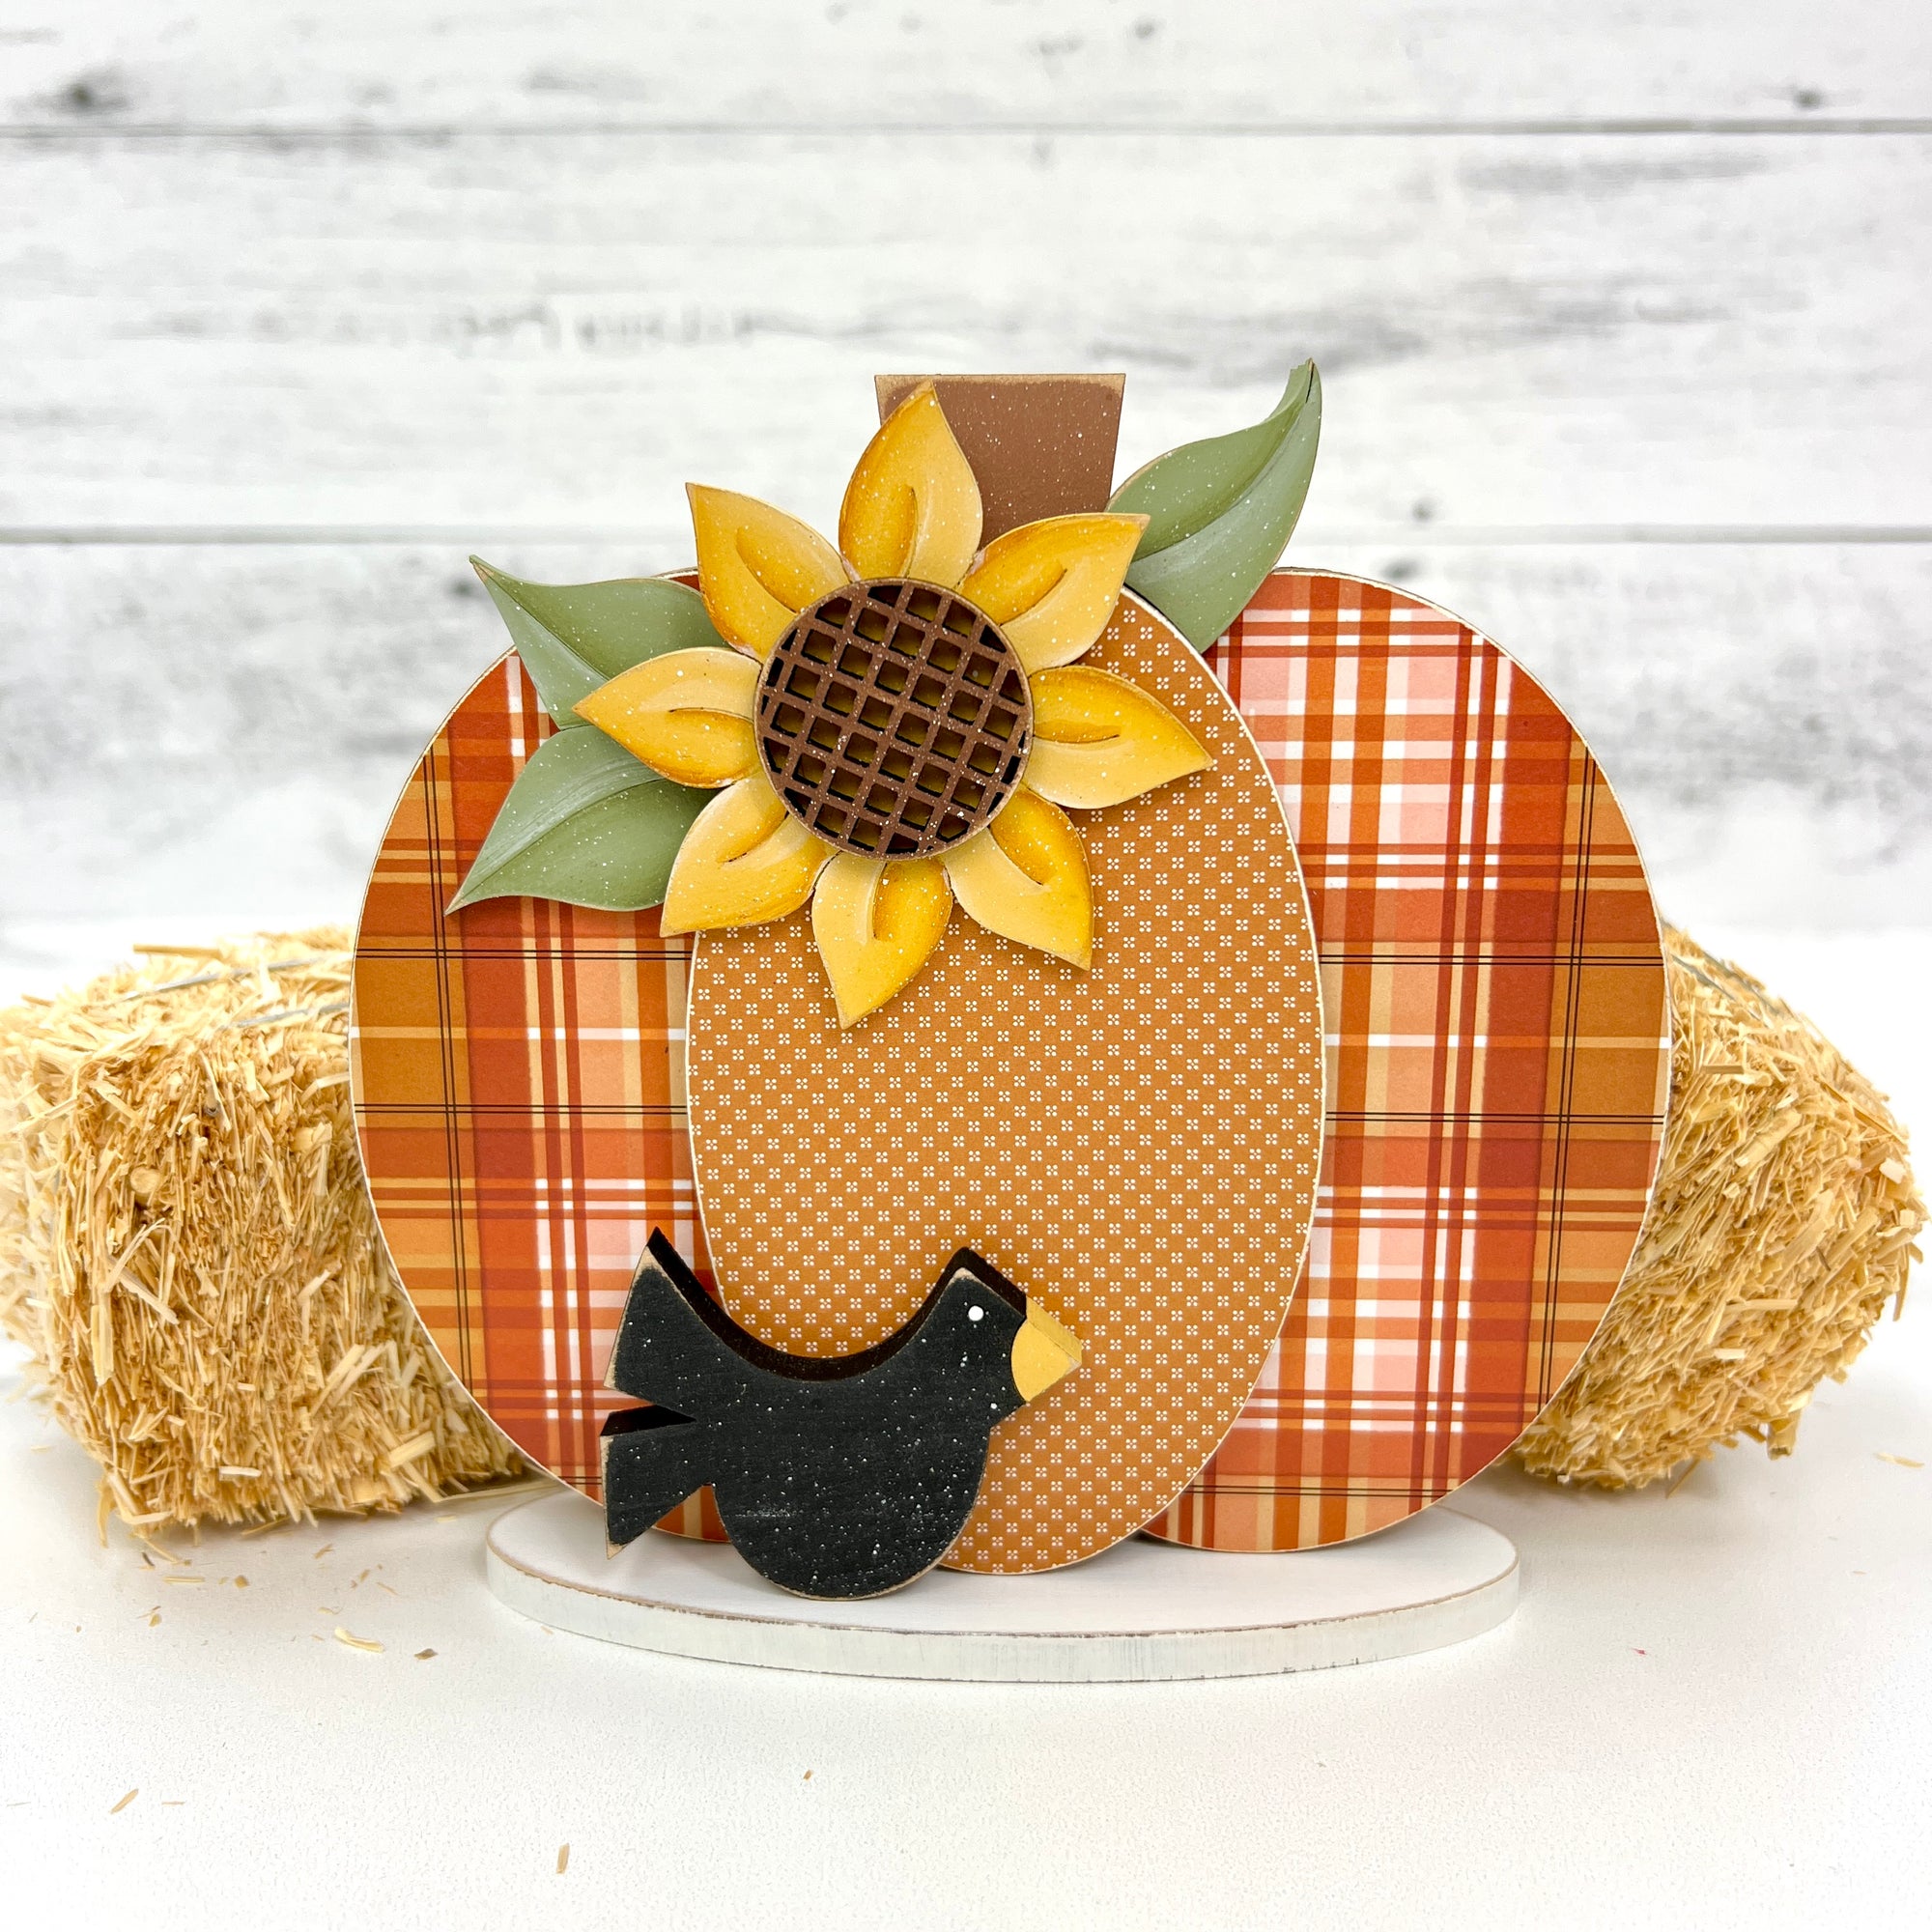 Small fall pumpkin wood decor craft kit with a sunflower, black crow, and plaid printed pumpkin